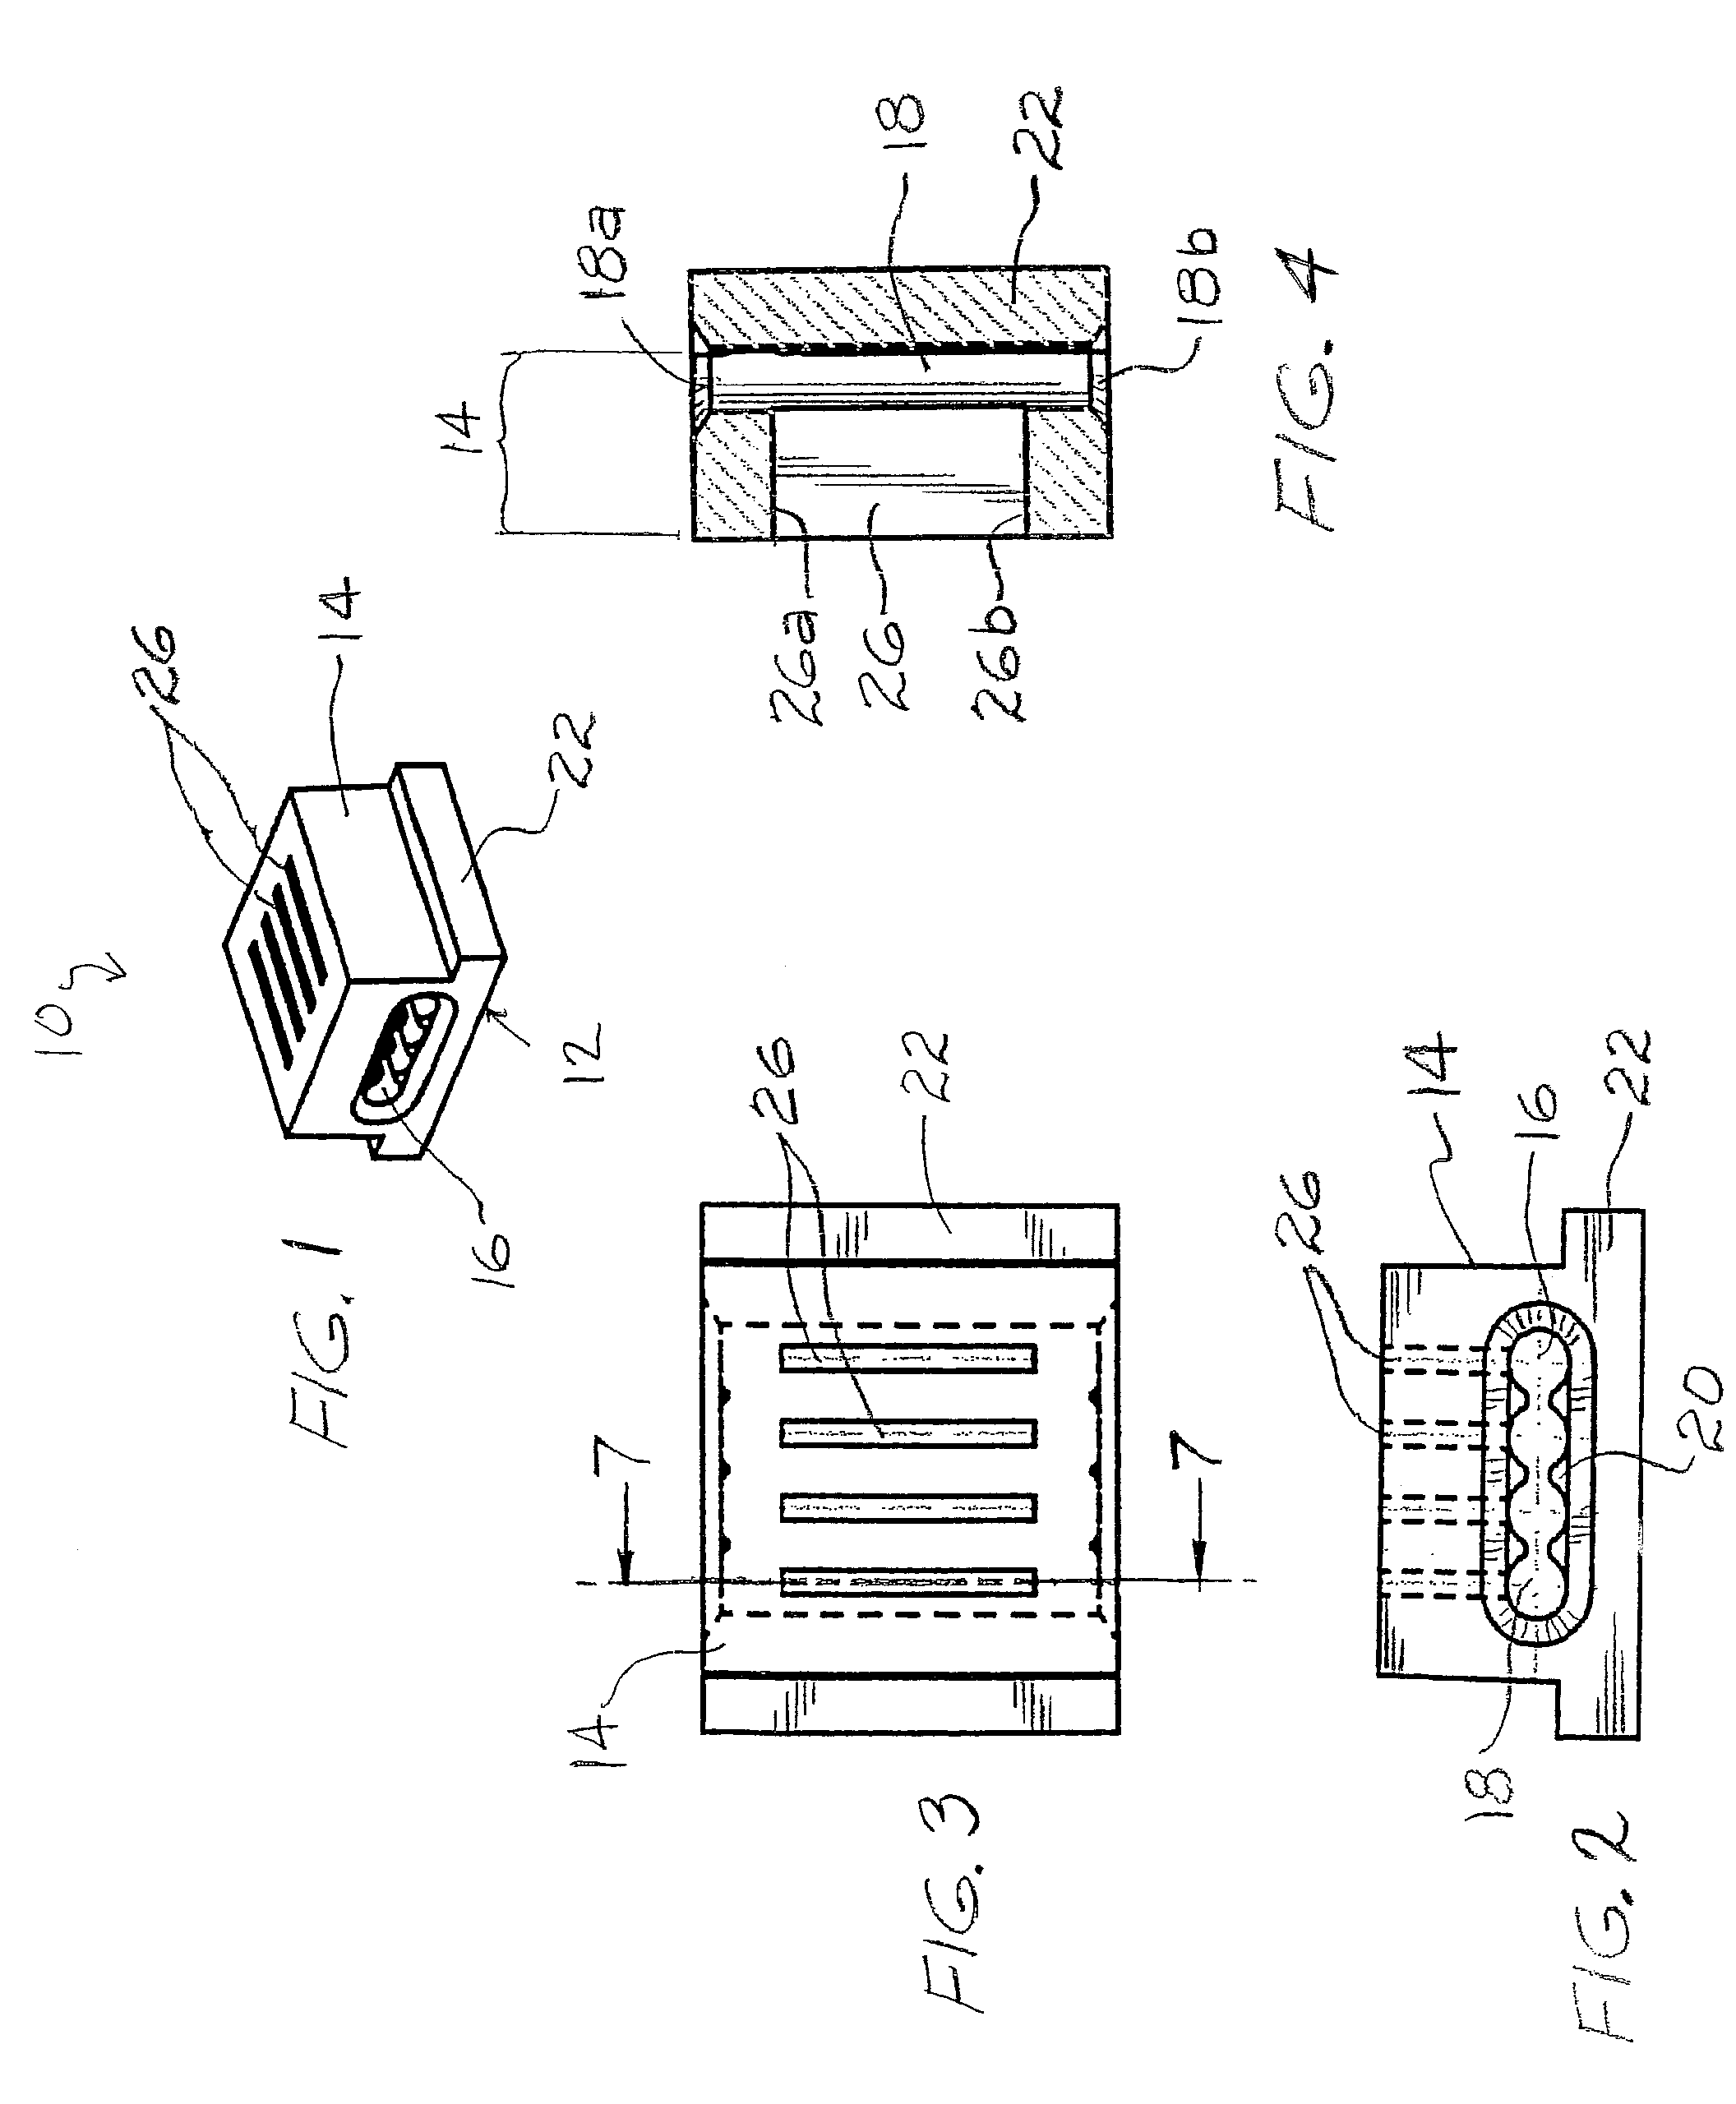 Insulation displacement connector assembly and system adapted for surface mounting on printed circuit board and method of using same